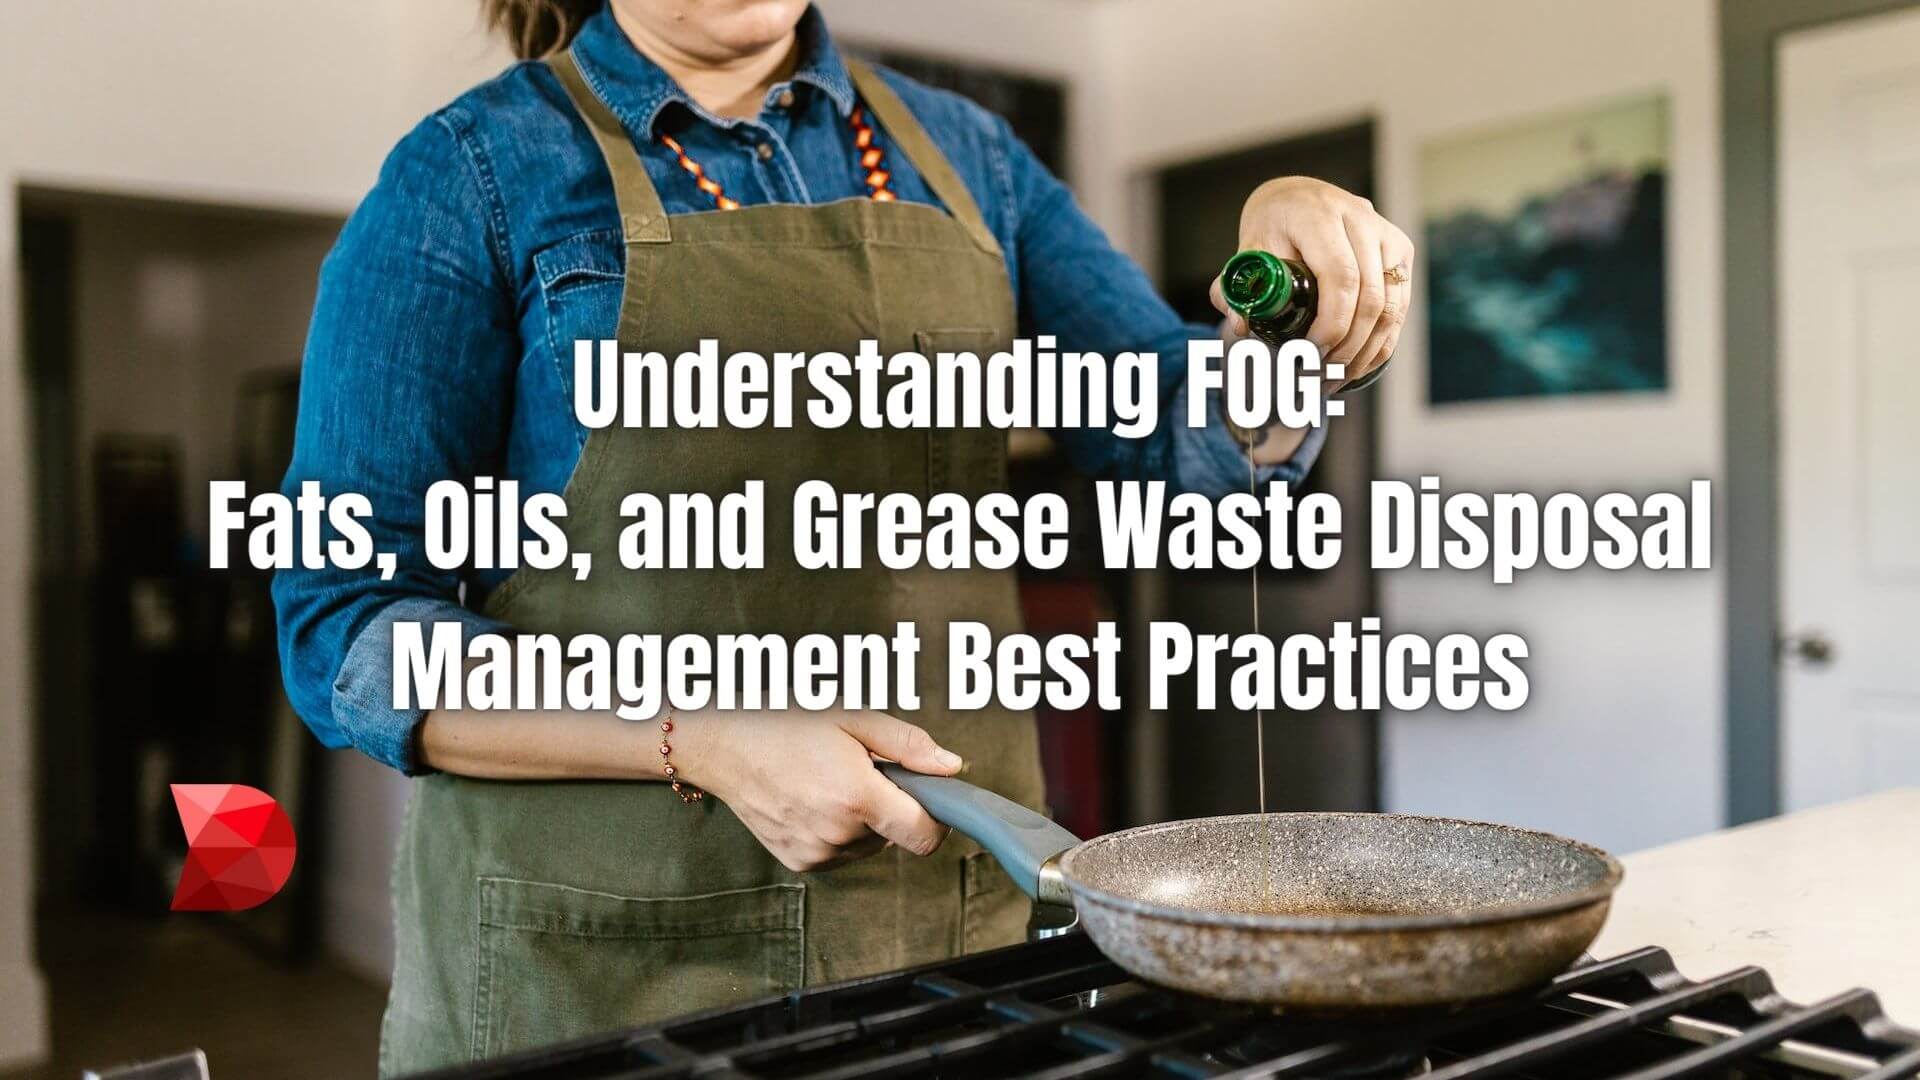 Grease Waste Disposal Management Best Practices - DataMyte